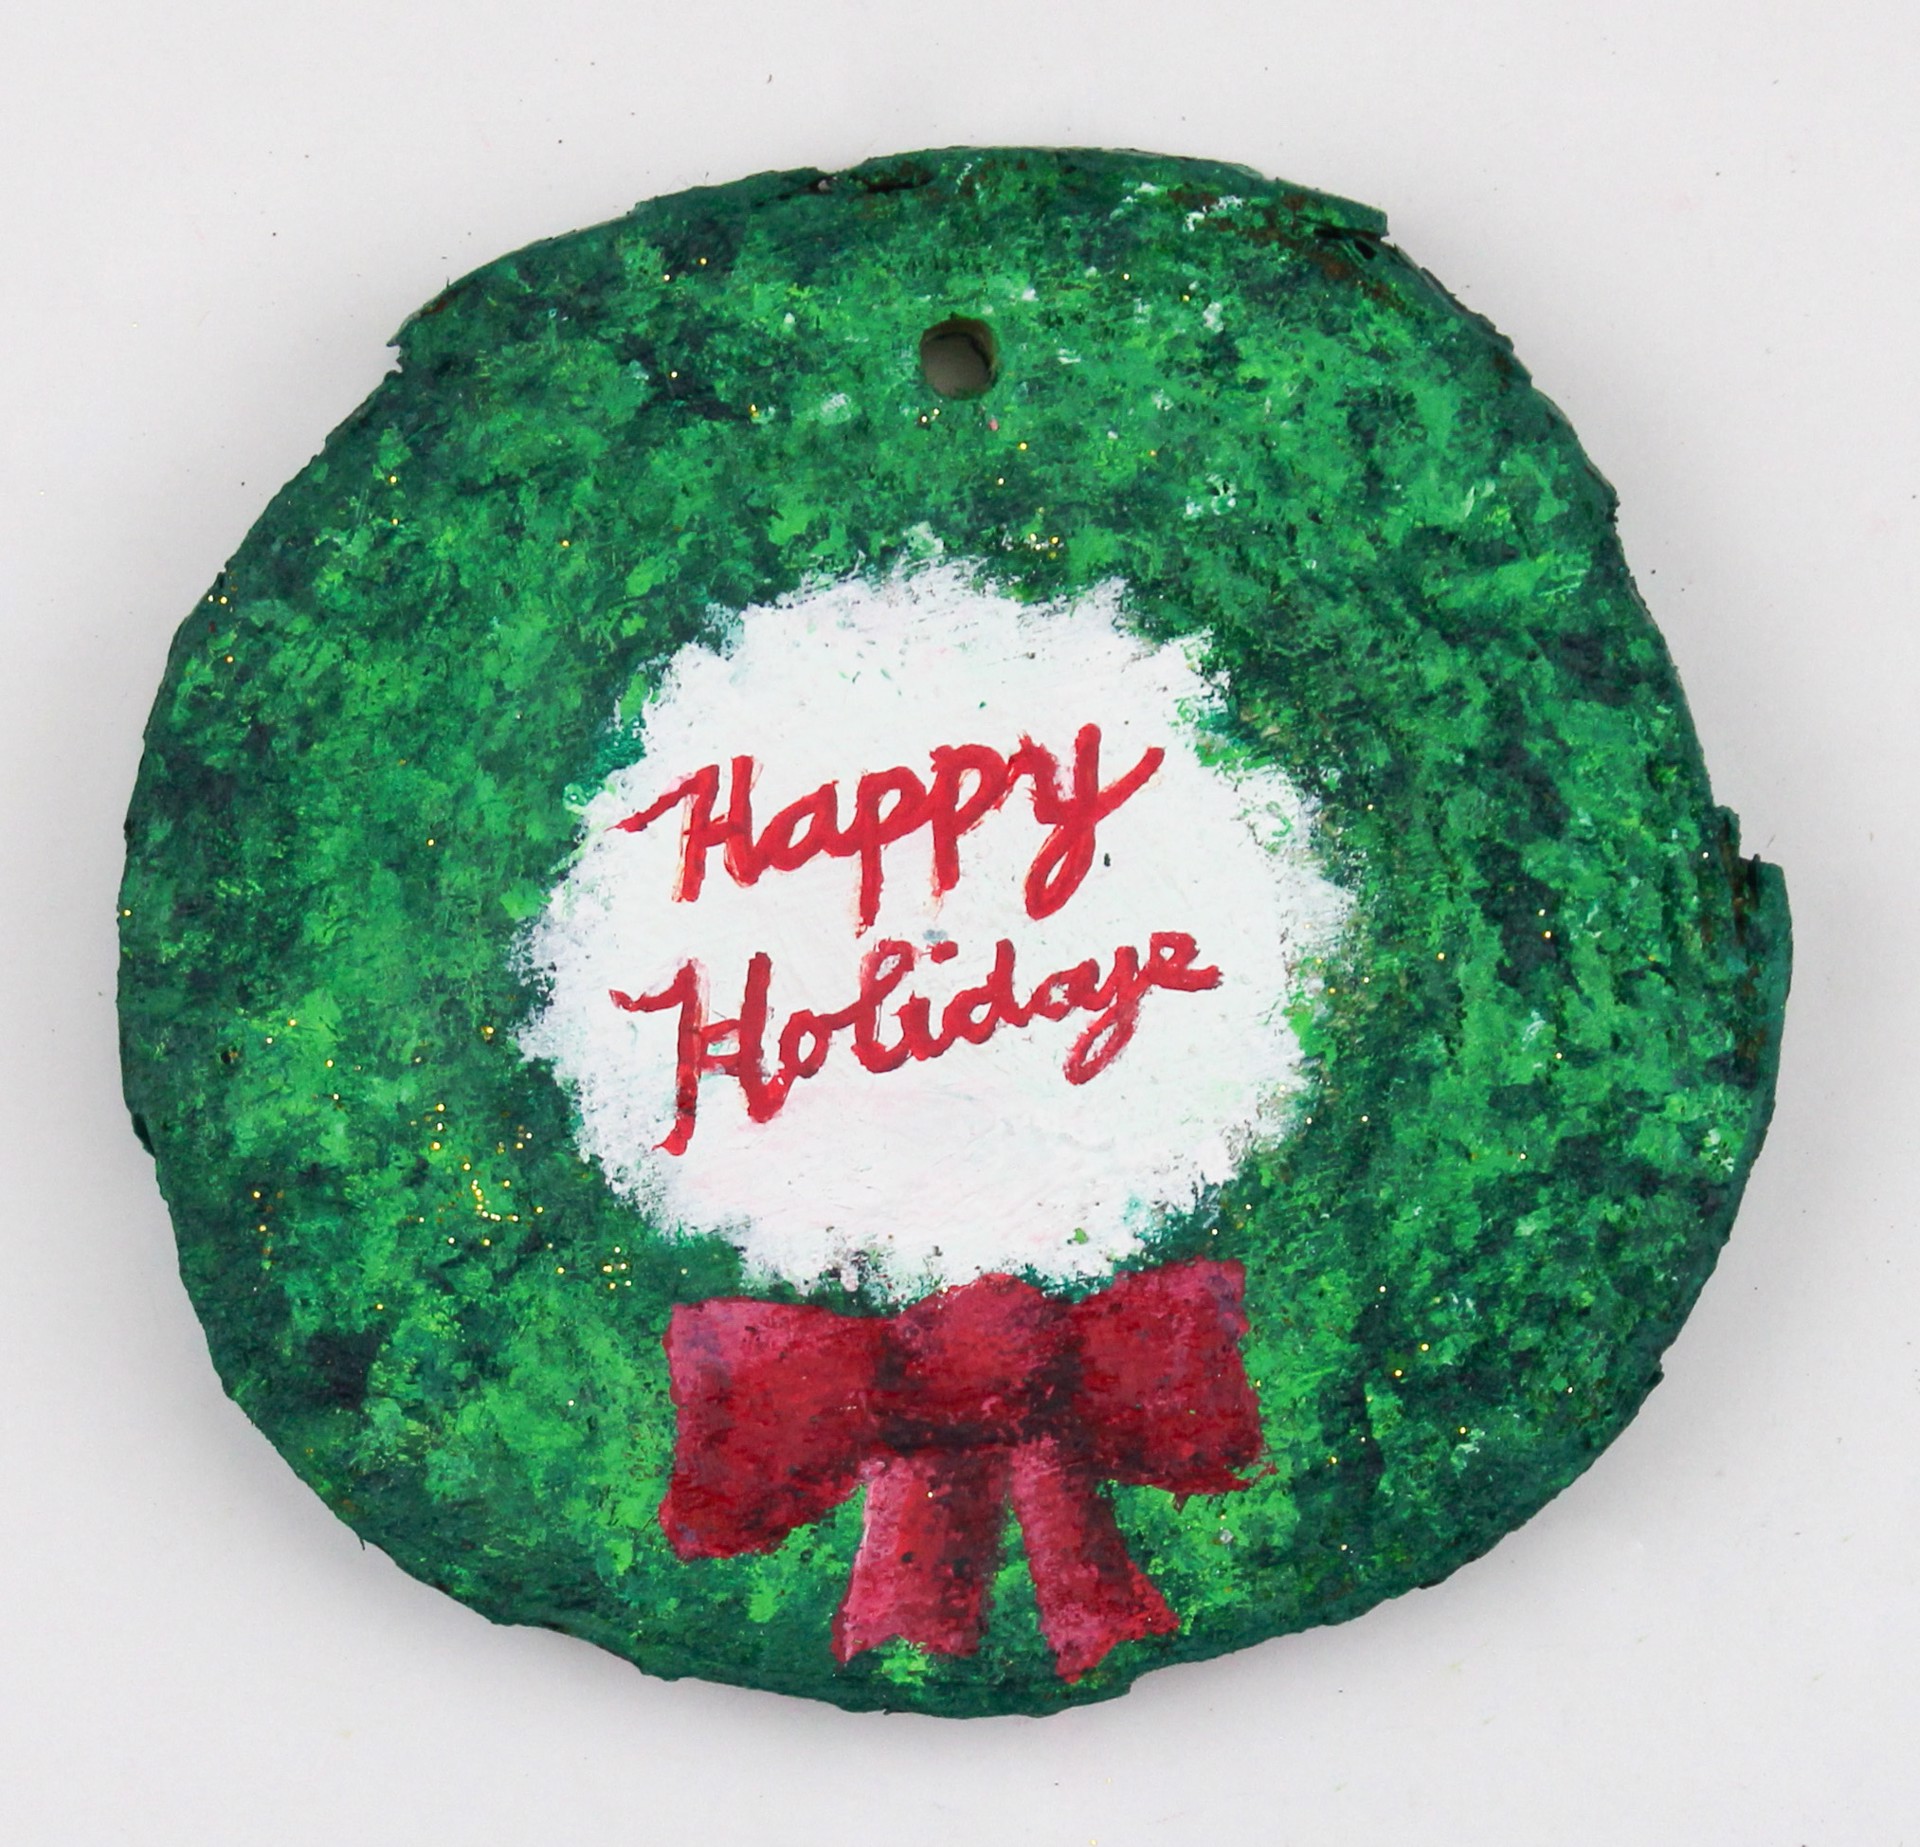 Happy Holidays! (ornament) by Mike Knox